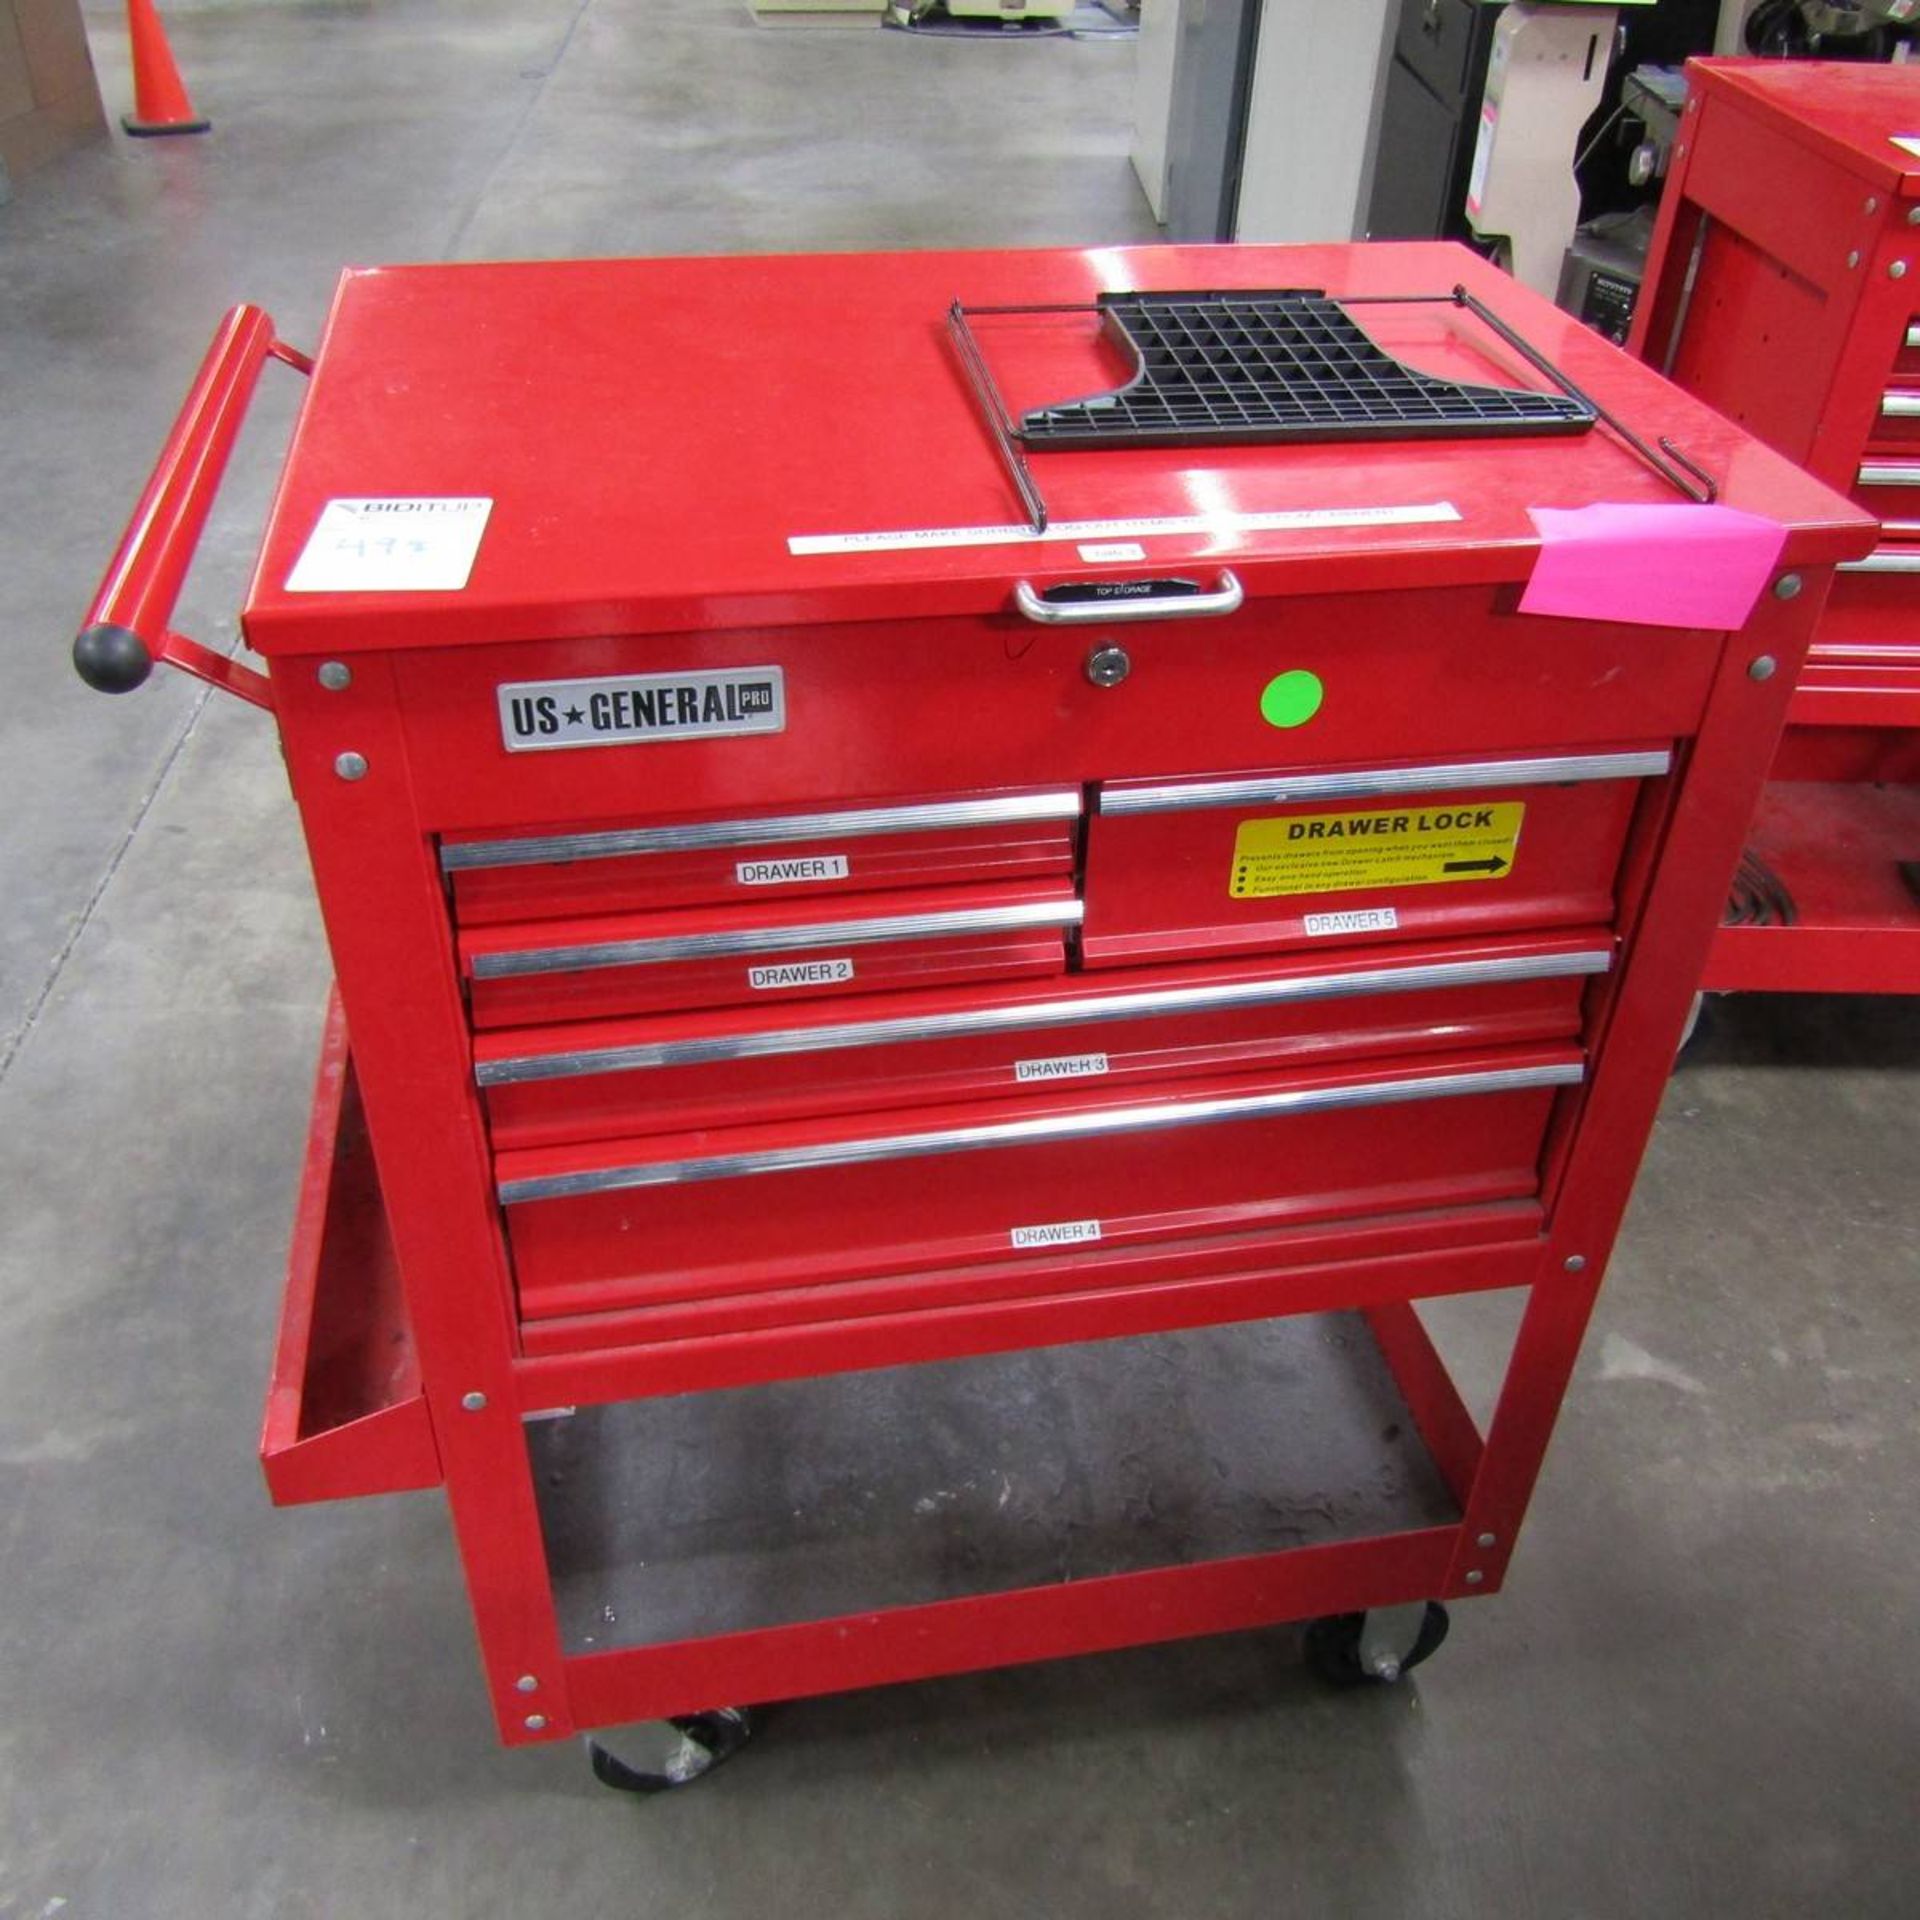 U.S. General 6-Drawer Tool Box on Casters